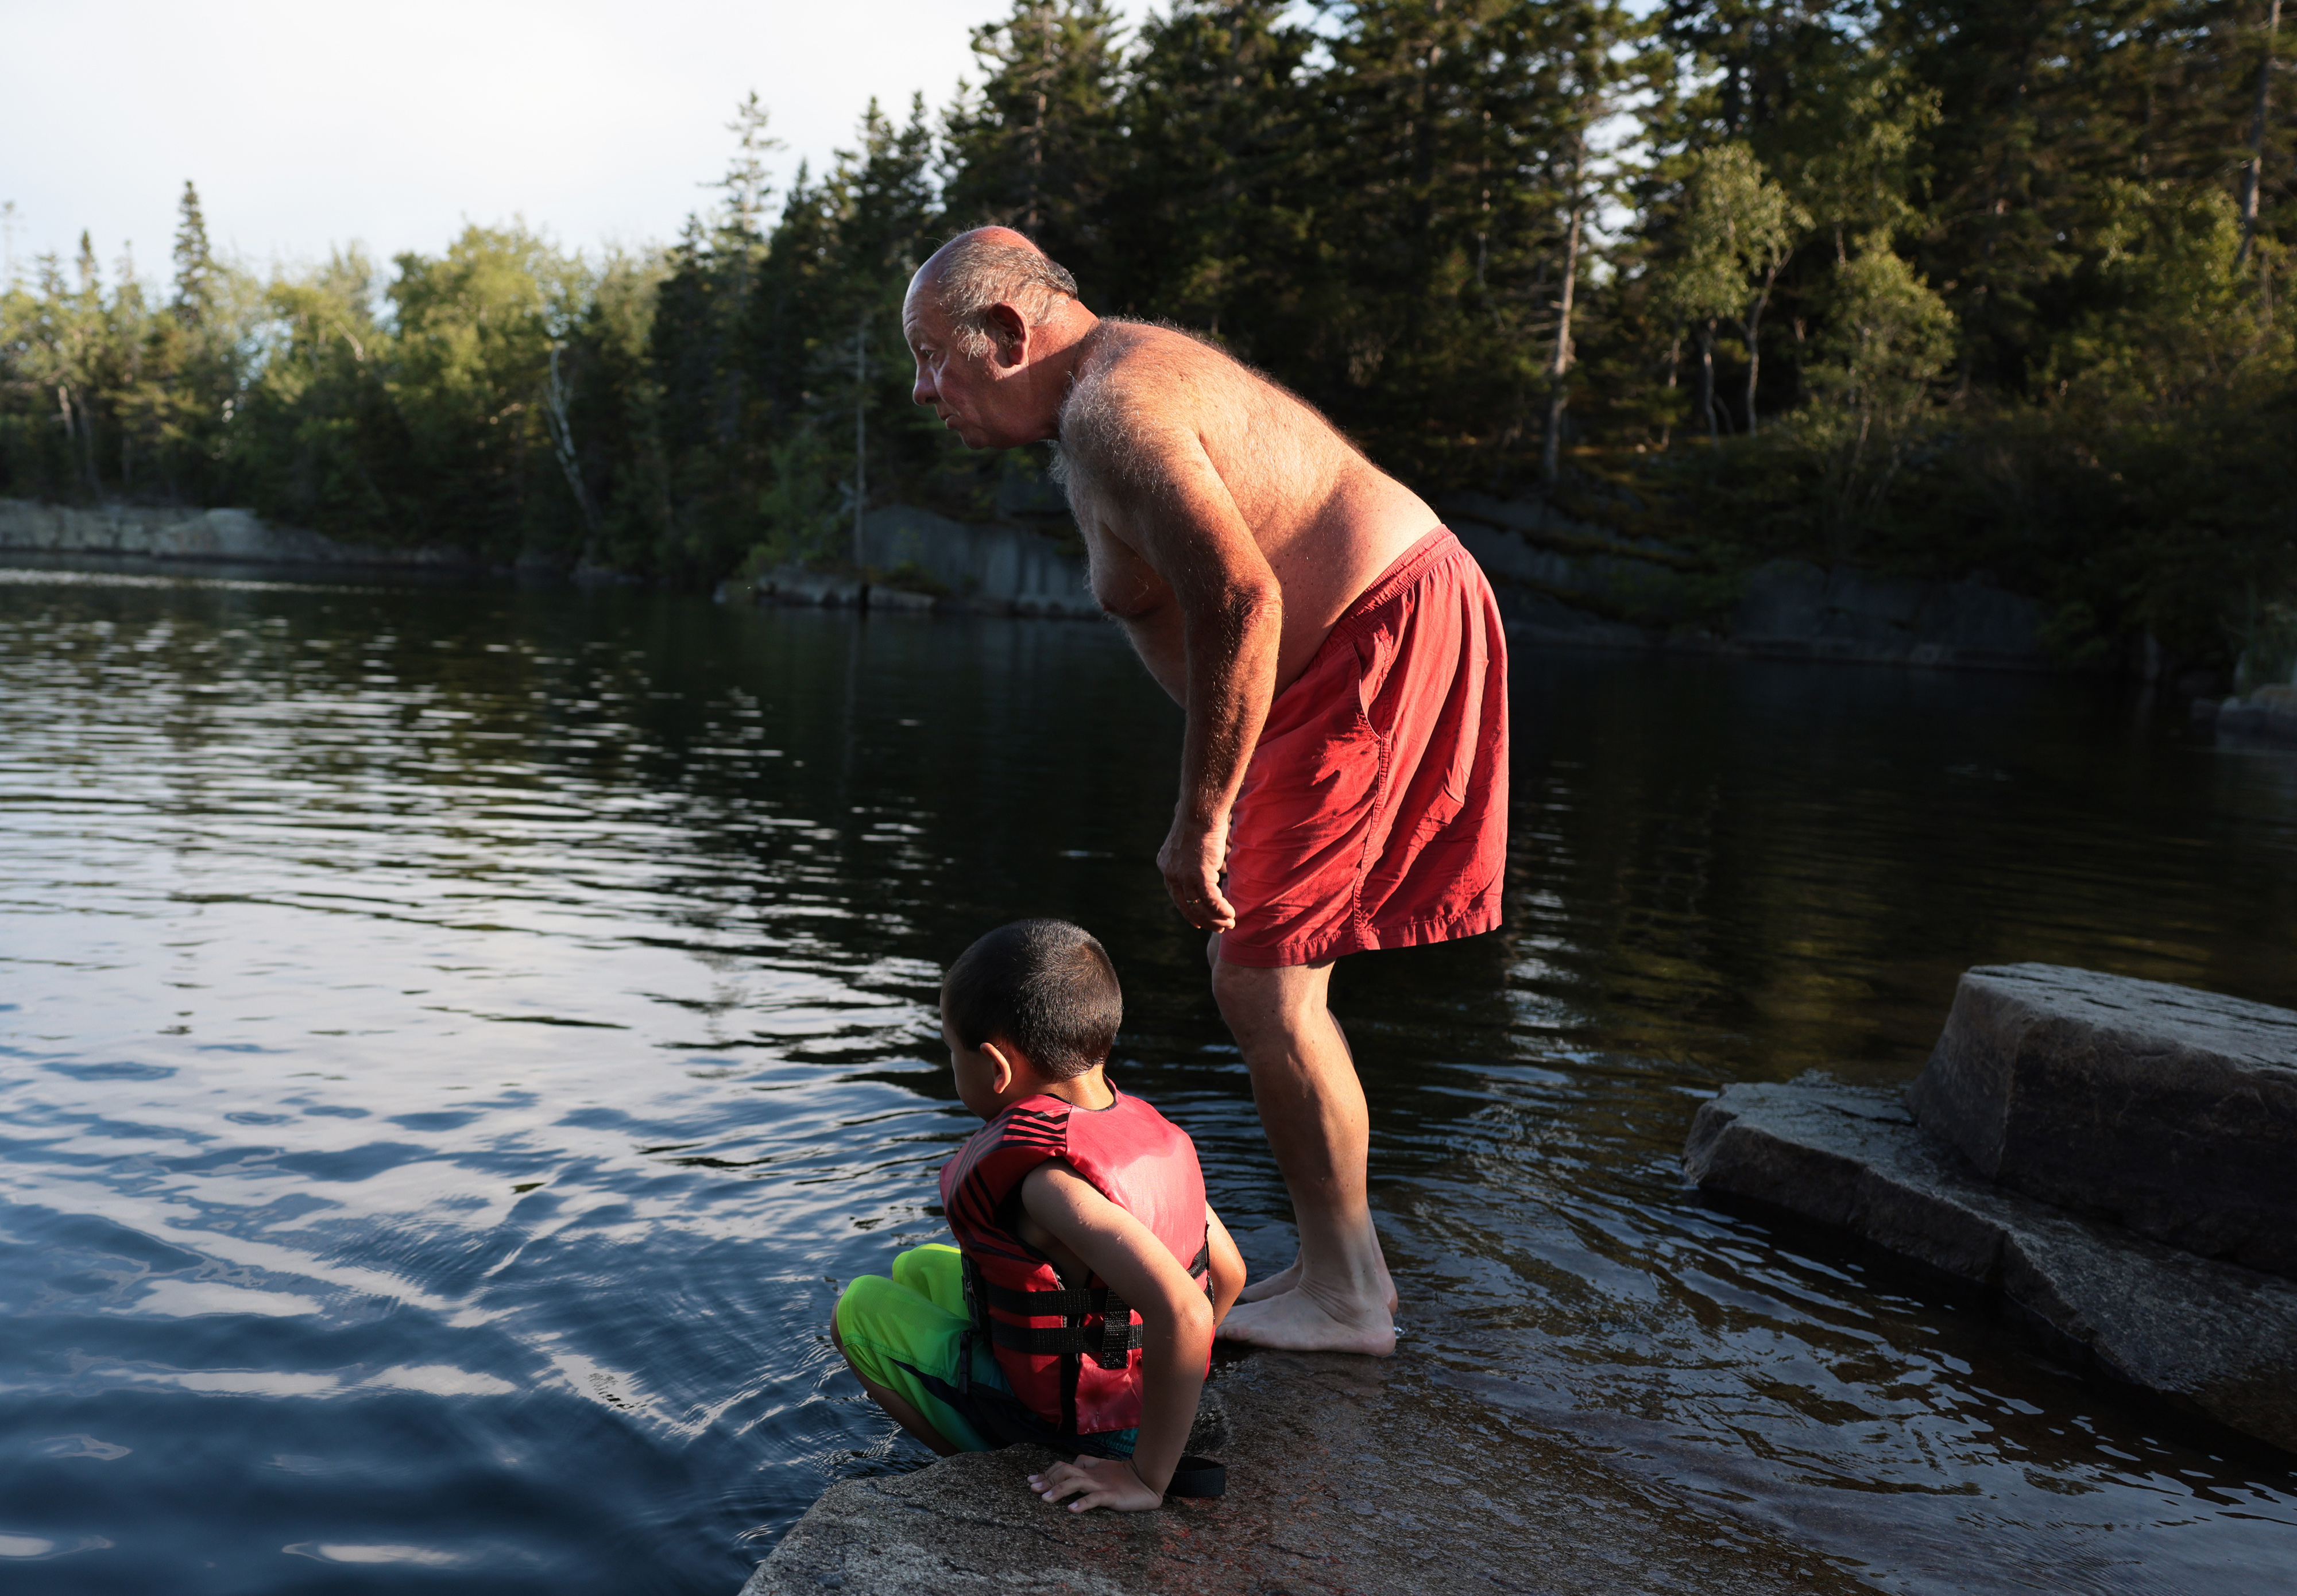 John Bickford, a lobsterman on the island, swam with his 5-year-old son, Michael, at Booth’s Quarry on Vinalhaven on July 23. 
